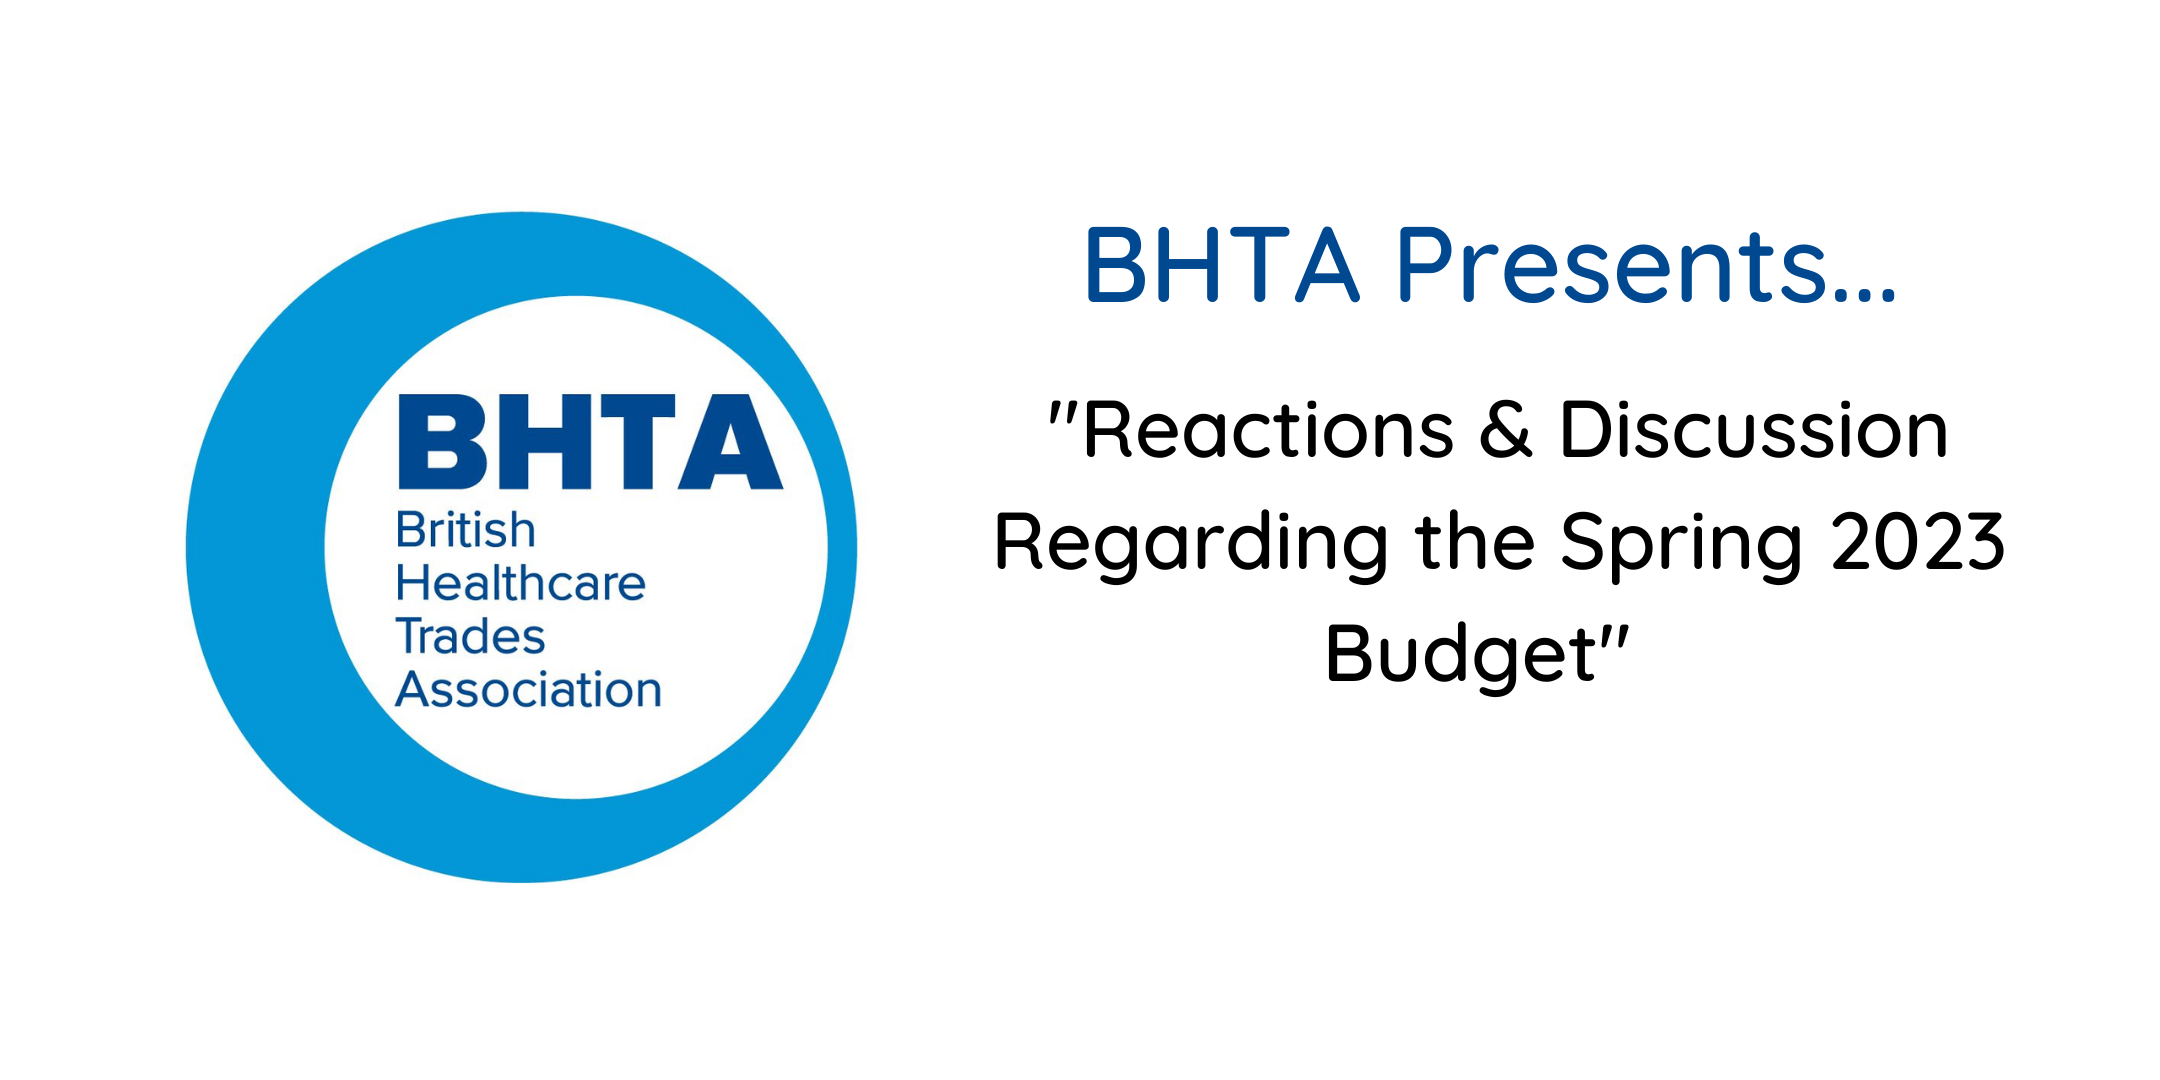 BHTA presents… “Reactions & Discussion Regarding the Spring 2023 Budget”